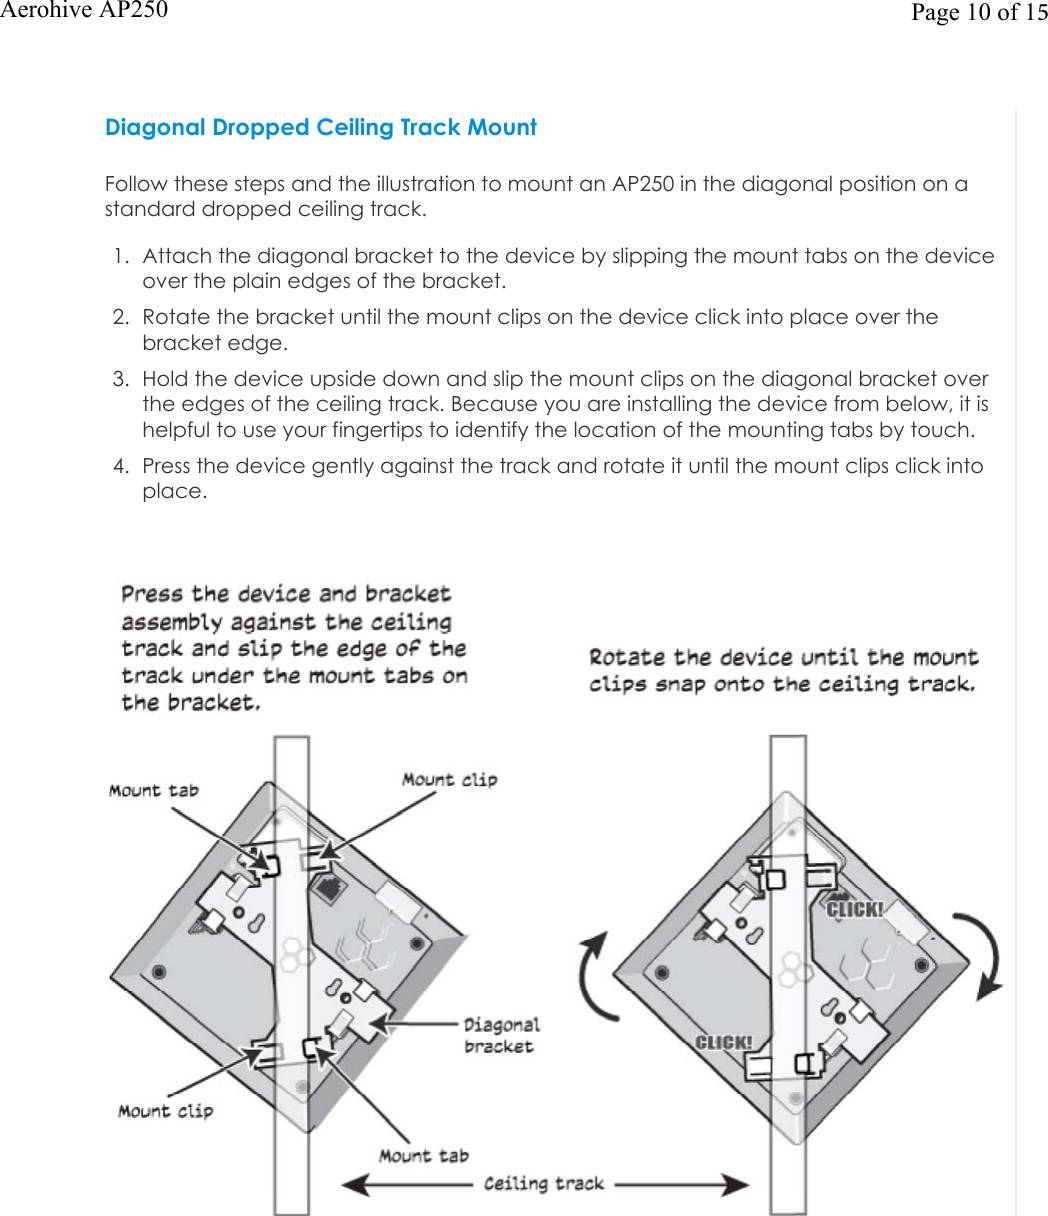 Diagonal Dropped Ceiling Track MountFollow these steps and the illustration to mount an AP250 in the diagonal position on a standard dropped ceiling track.1. Attach the diagonal bracket to the device by slipping the mount tabs on the deviceover the plain edges of the bracket.2. Rotate the bracket until the mount clips on the device click into place over thebracket edge.3. Hold the device upside down and slip the mount clips on the diagonal bracket overthe edges of the ceiling track. Because you are installing the device from below, it ishelpful to use your fingertips to identify the location of the mounting tabs by touch.4. Press the device gently against the track and rotate it until the mount clips click intoplace.Page 10 of 15Aerohive AP250